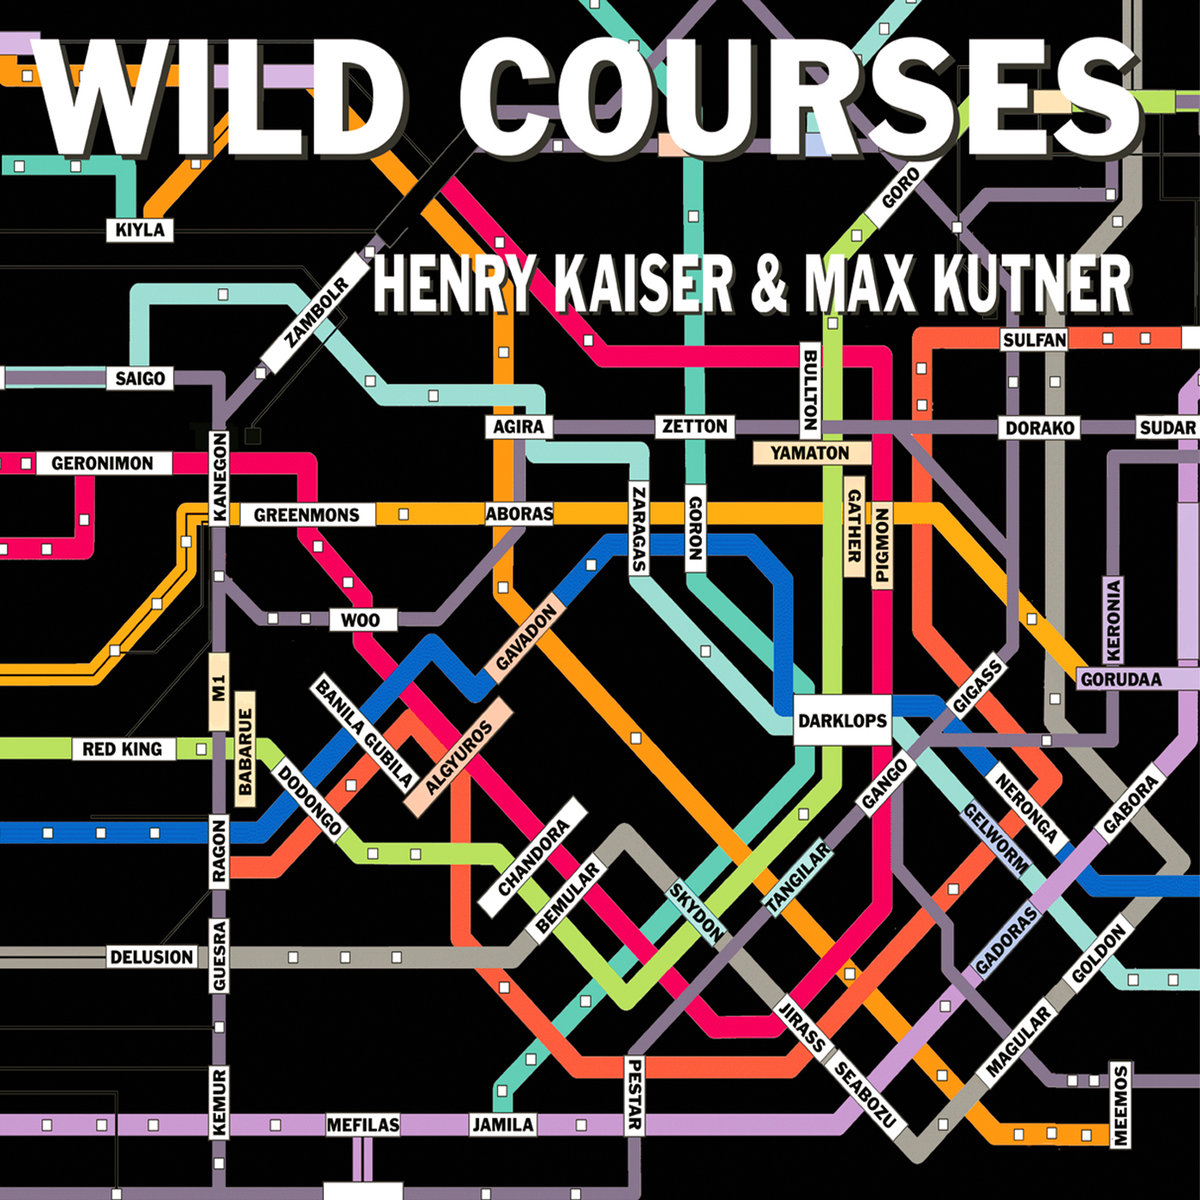 Wild Courses by Henry Kaiser and Max Kutner